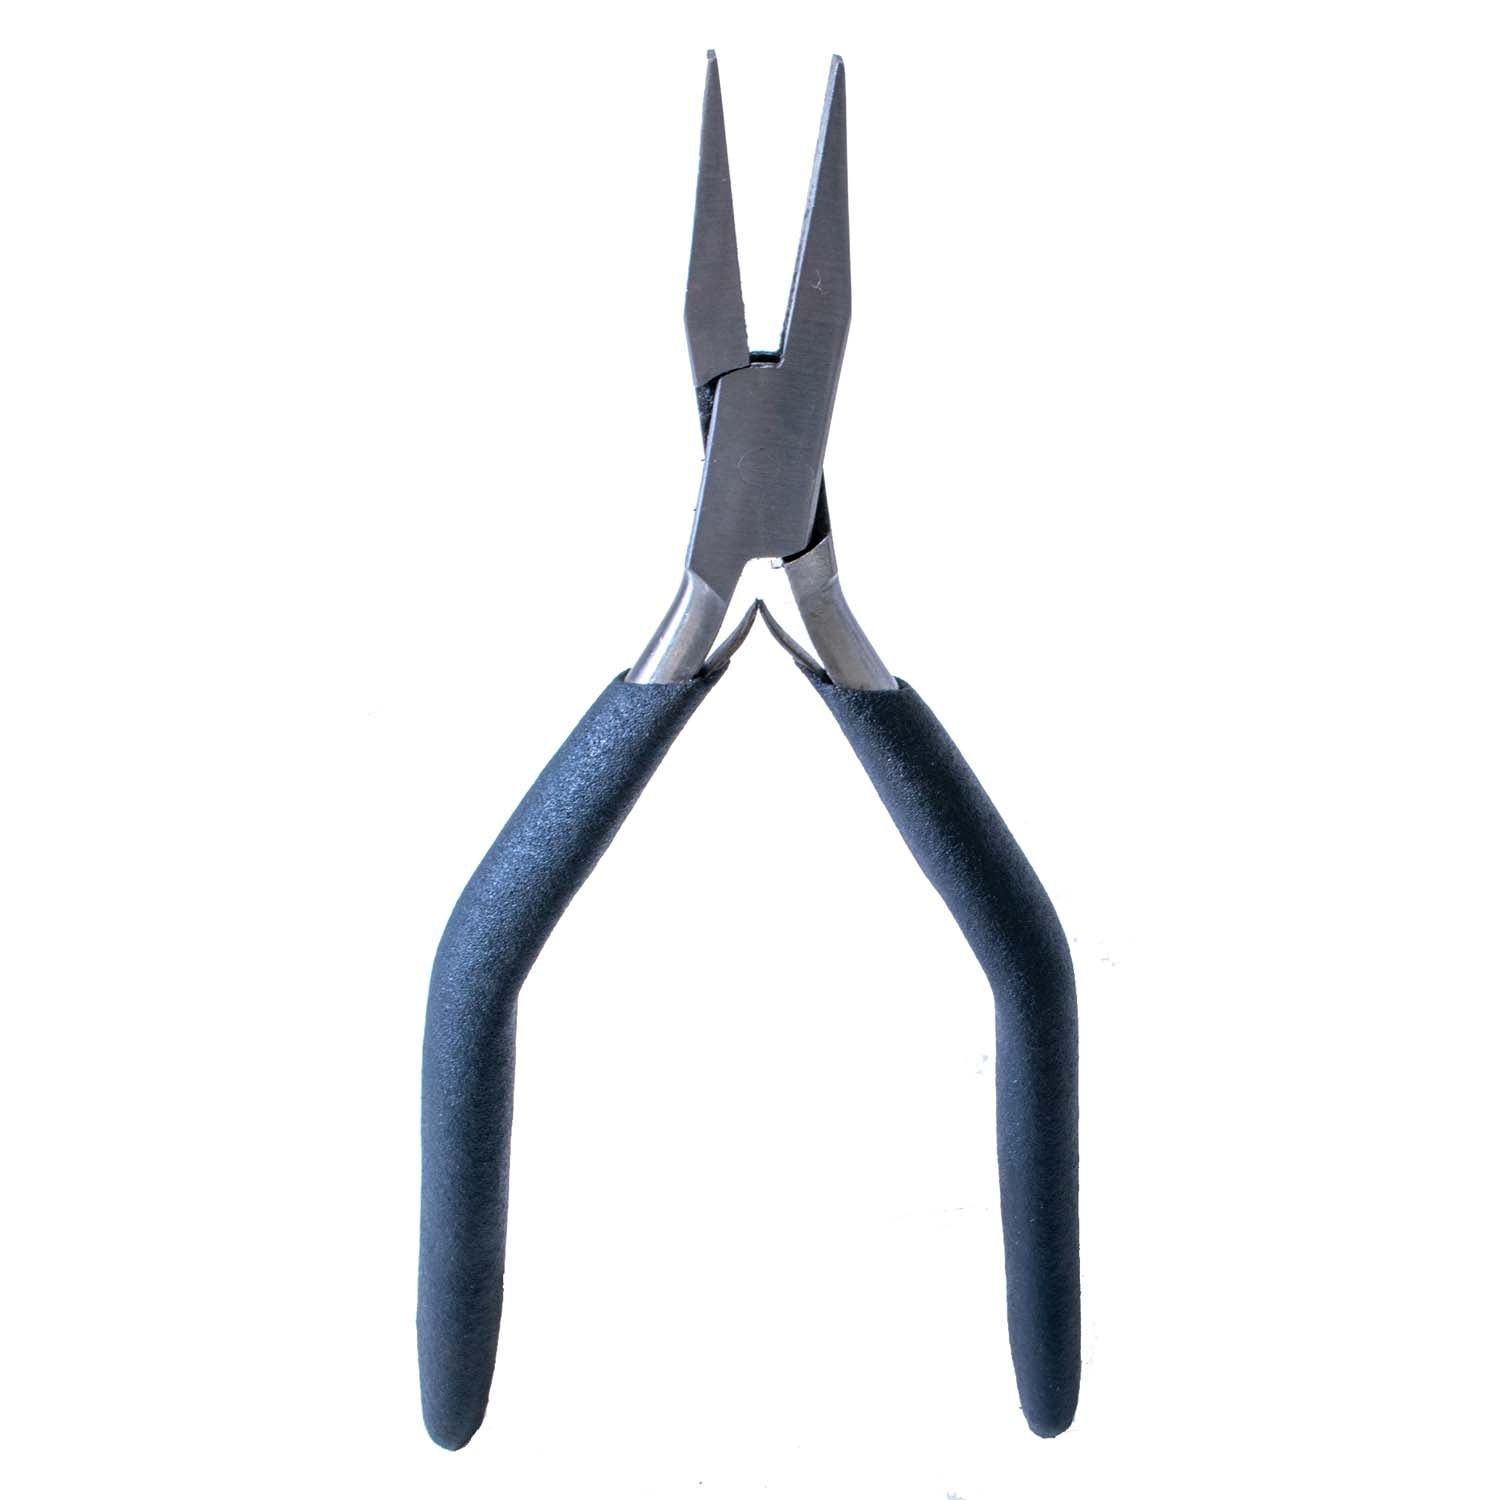 Snub nose pliers. 6.5 inches